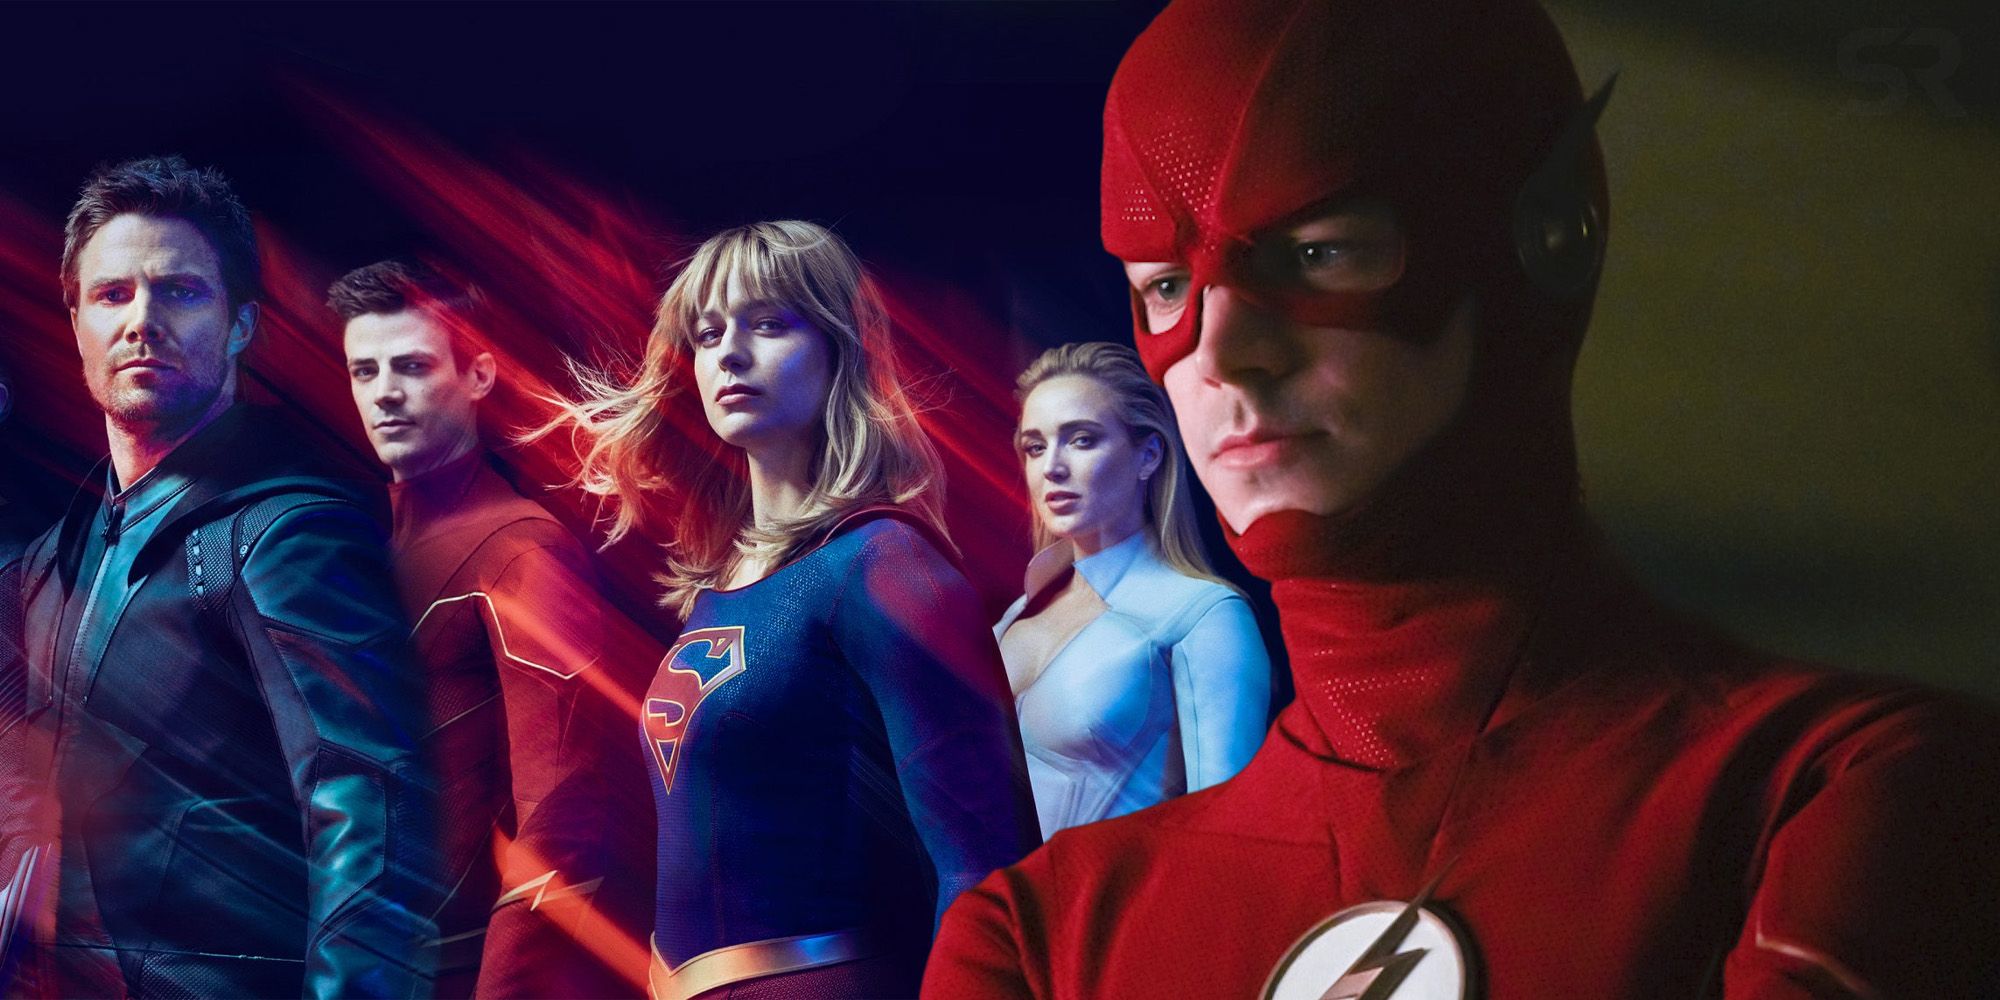 Why The Flash Could Be The Arrowverse’s Longest Running Show